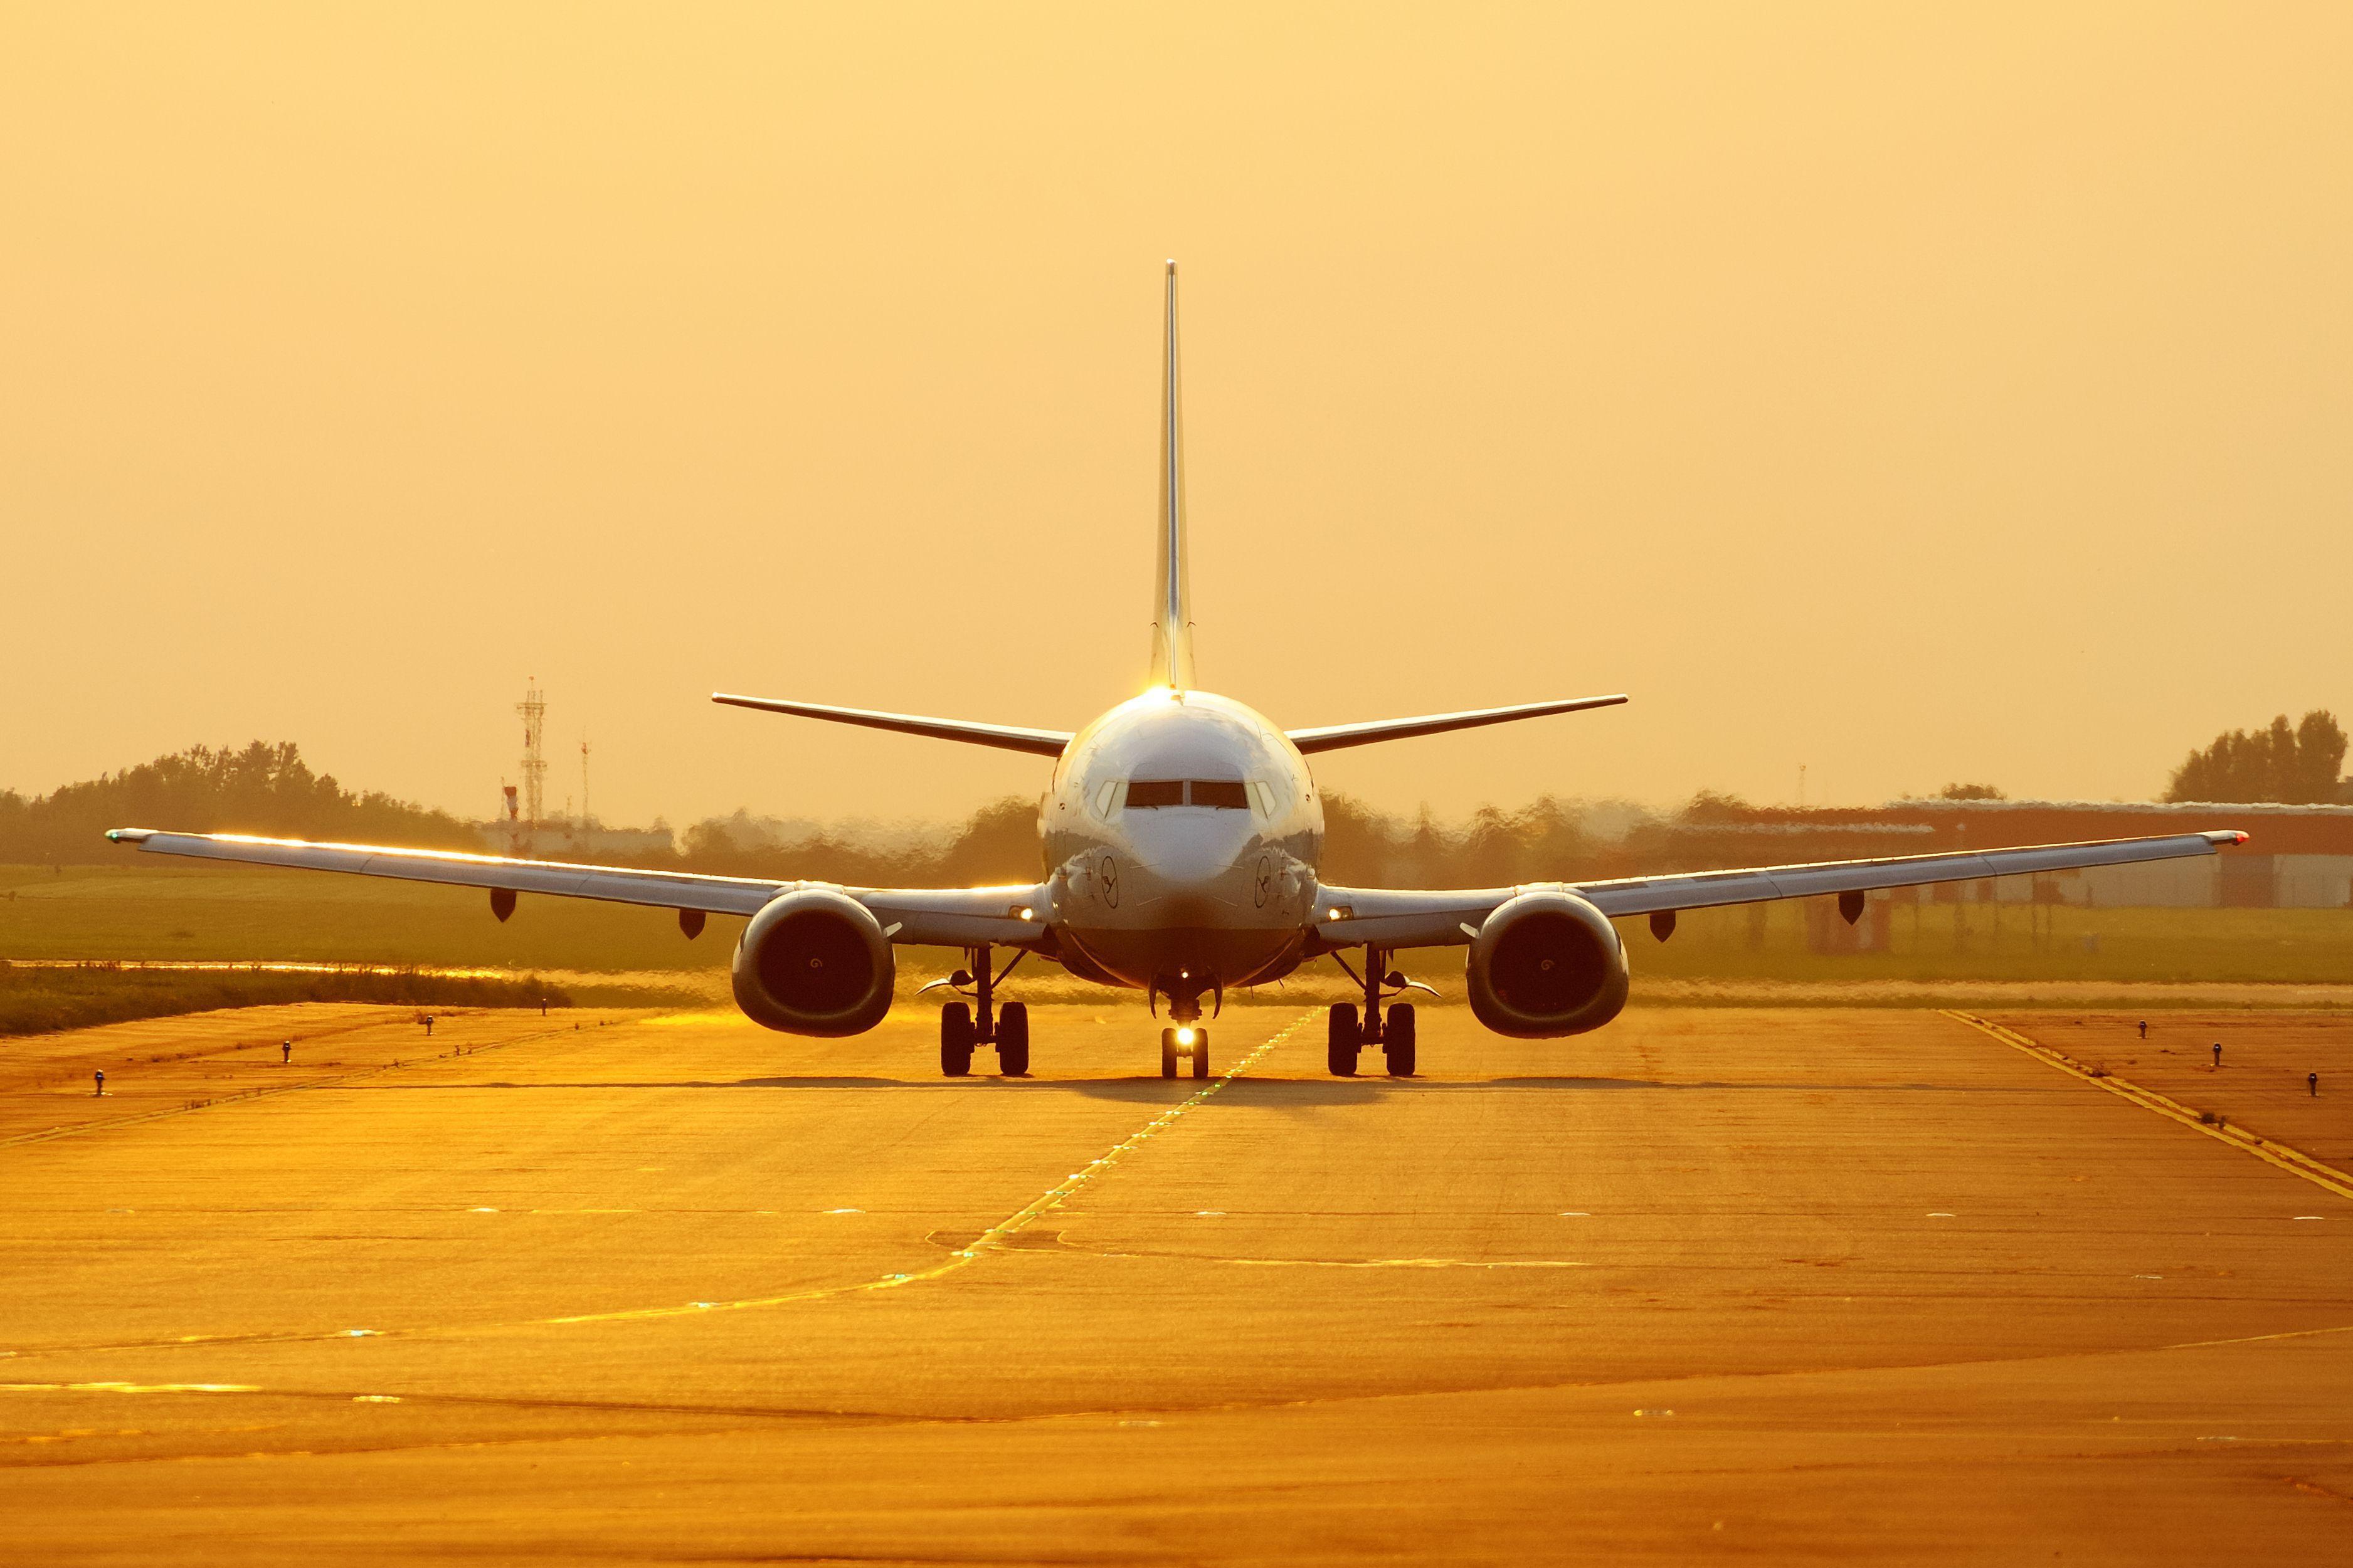 Boeing 737 aircraft on the runway wallpaper and image